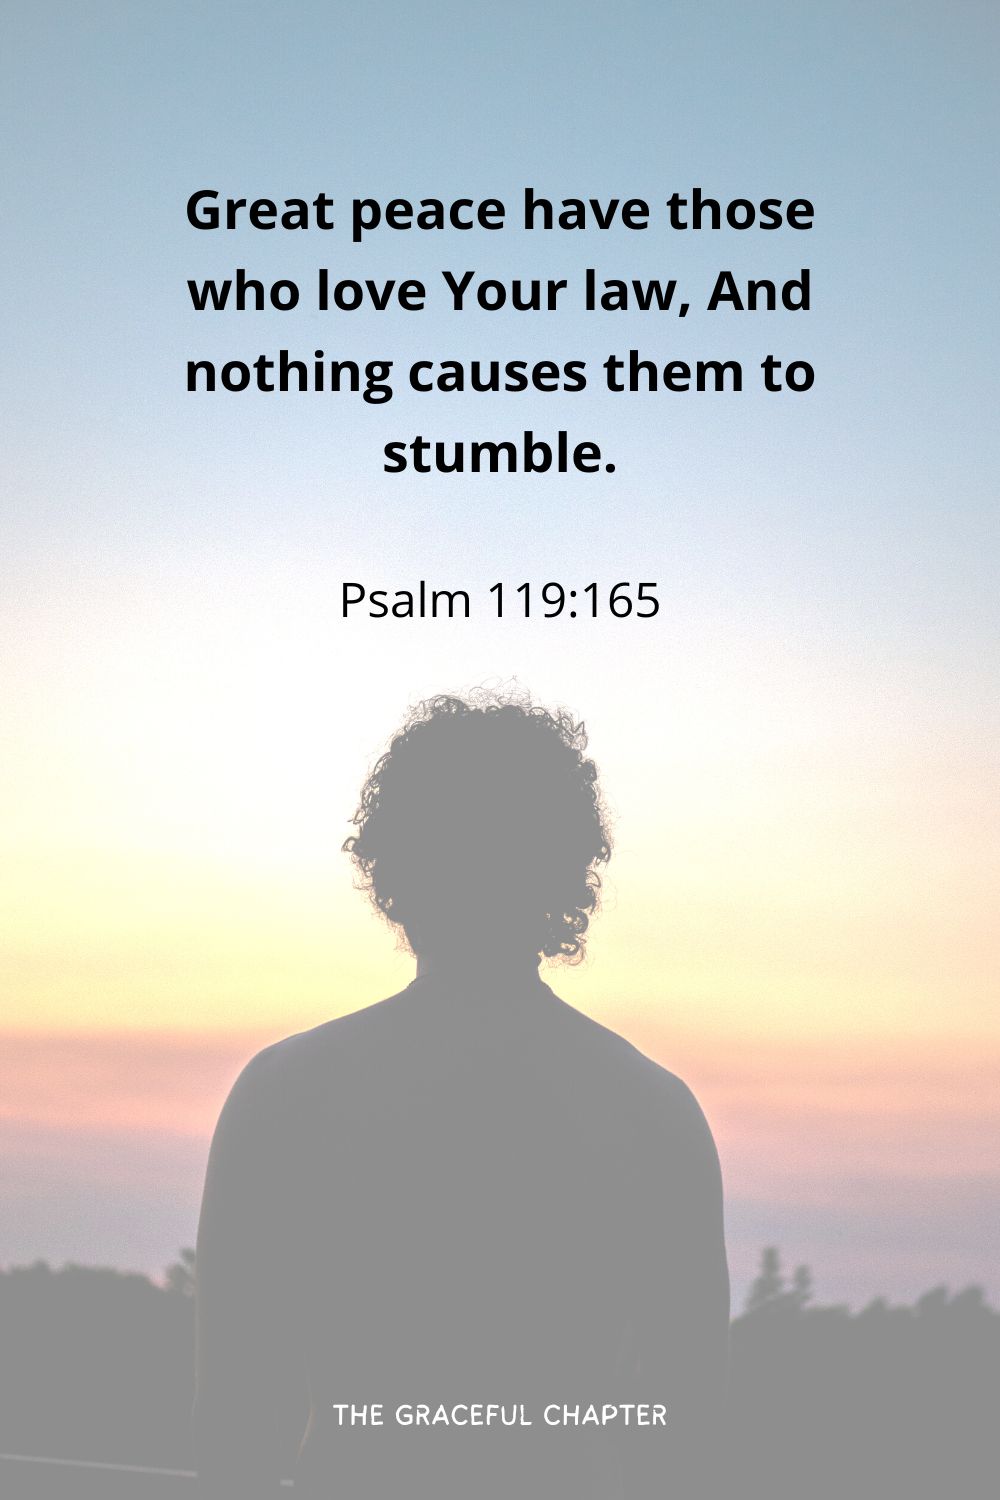 Great peace have those who love Your law, And nothing causes them to stumble.